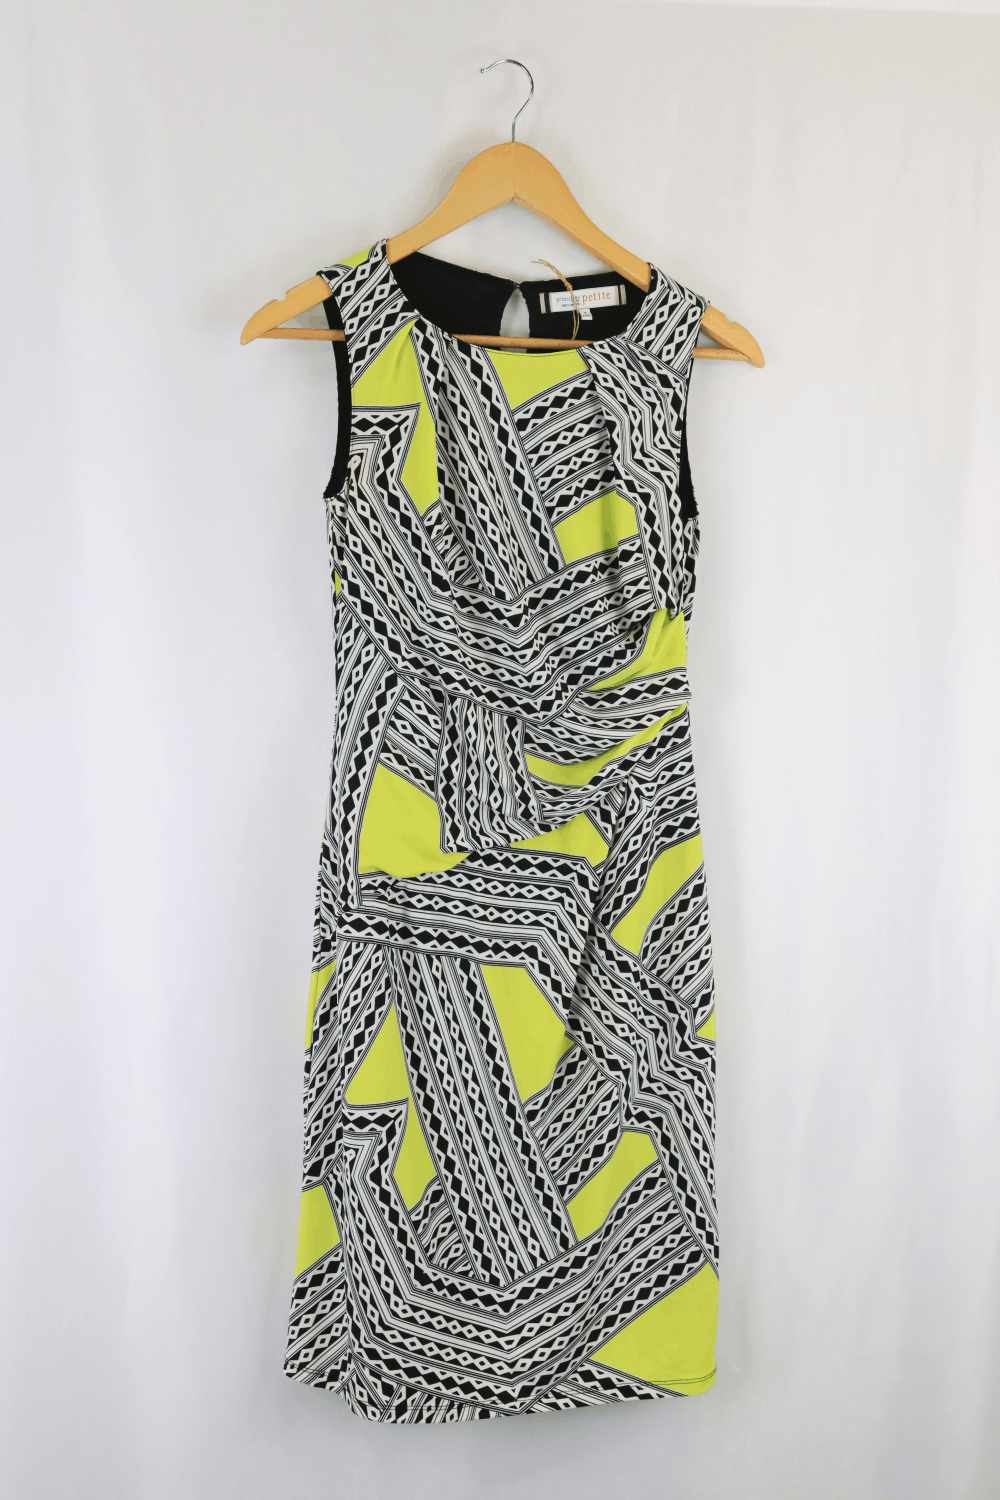 Principles By Bendelisi Petite Black and White and YELLOW Dress 8